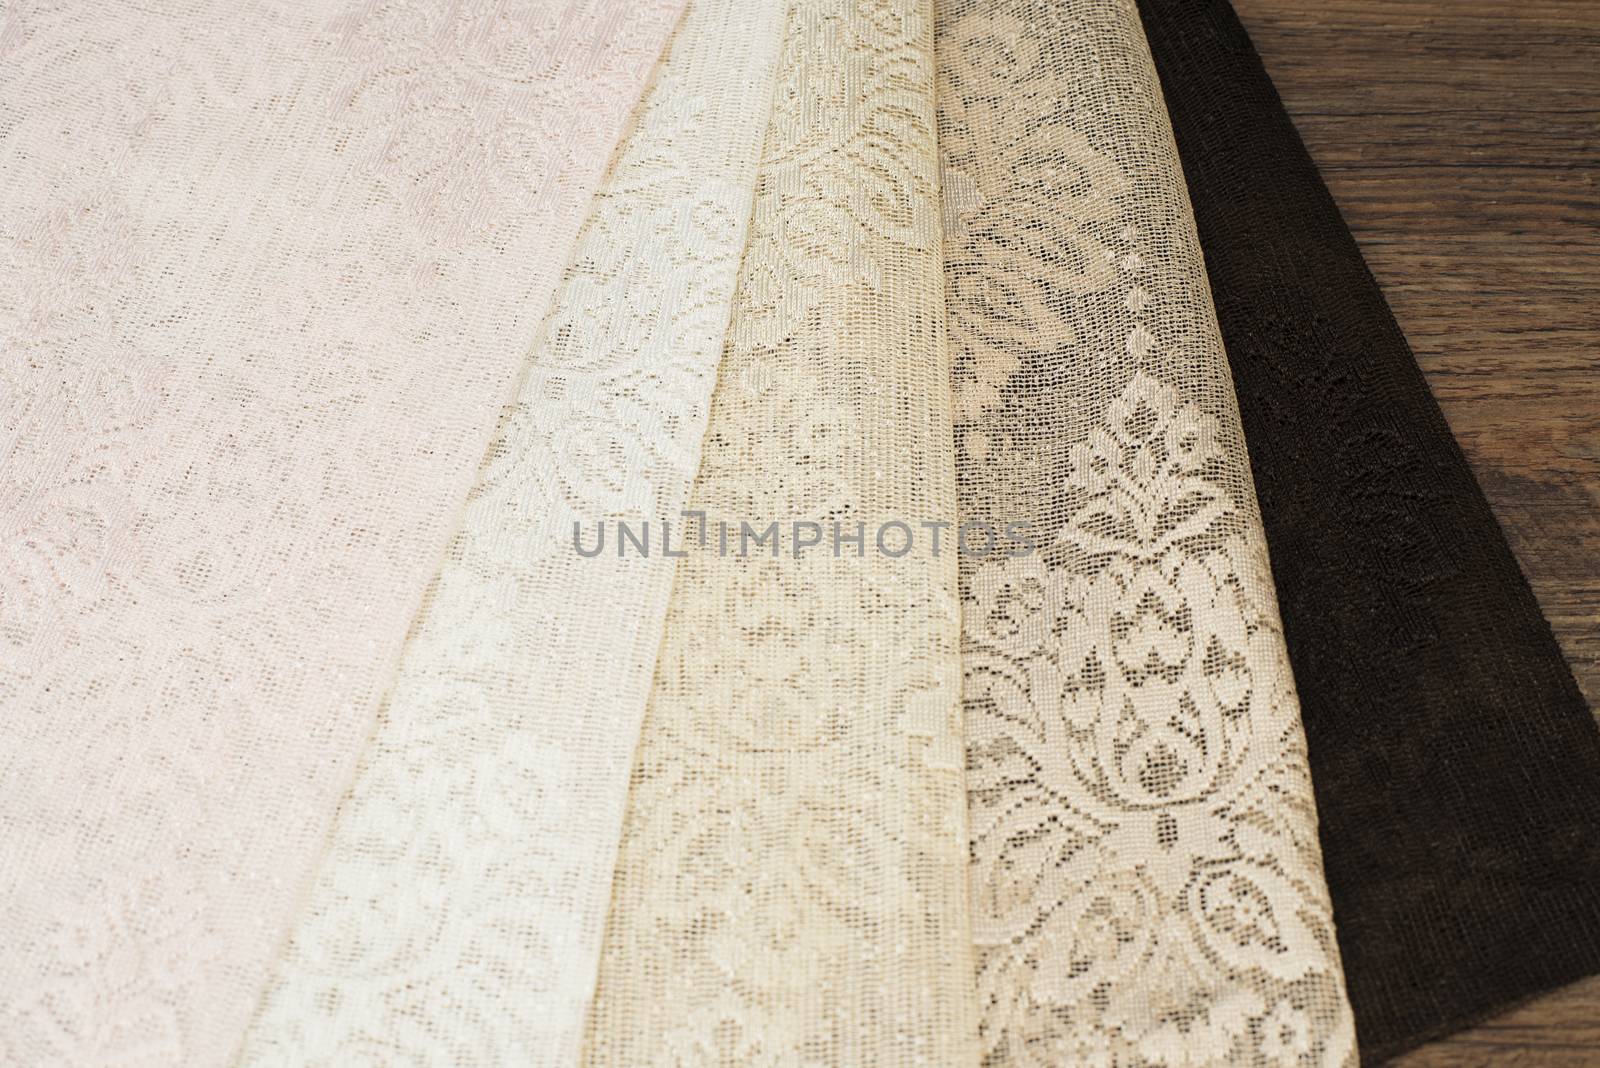 Close up of Beautiful Sheer Curtains Fabric Samples. Texture, Background, Pattern. Wedding Concept. Interior Design. Vintage Lace Tulle Chiffon ? White, Beige, Brown by sevda_stancheva